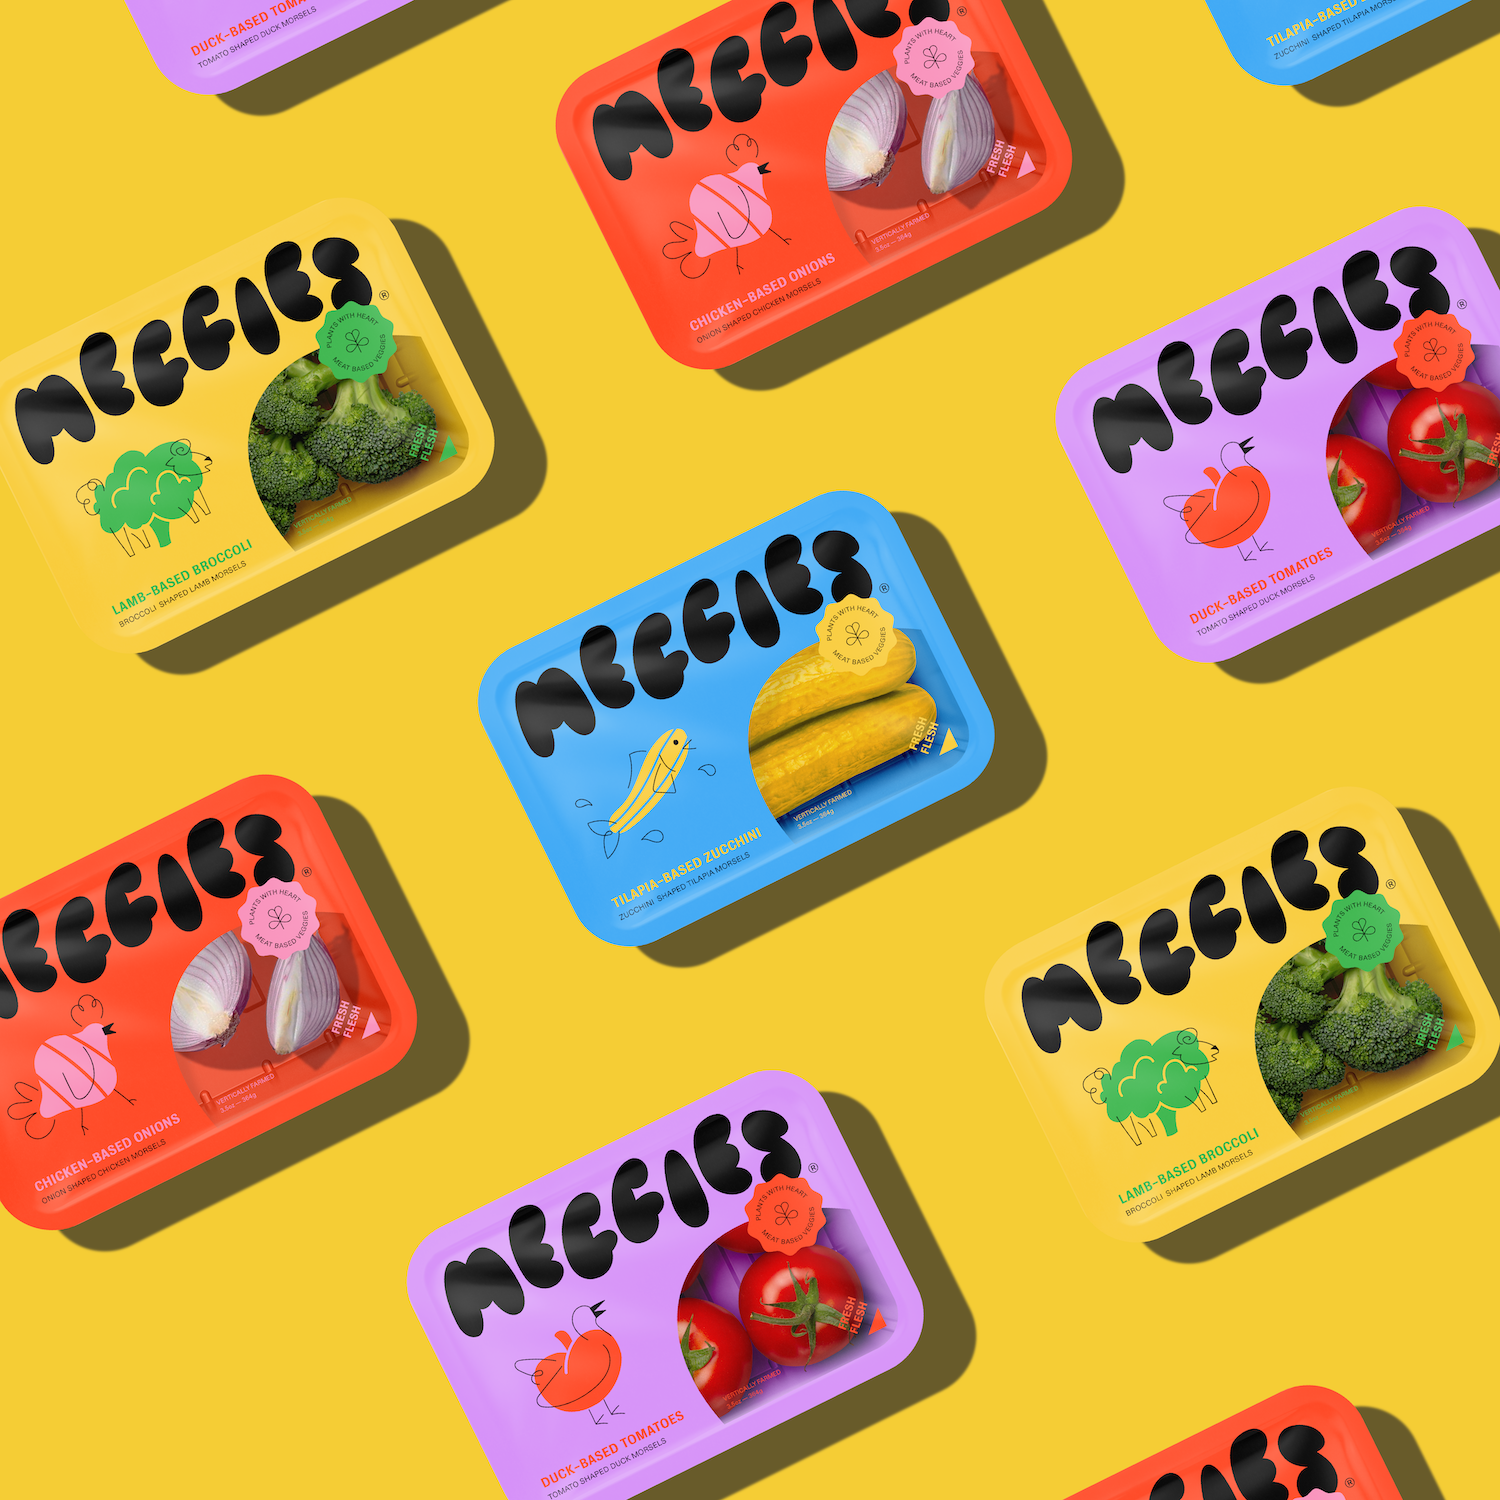 Meggies™ Brings Meat-Based Vegetables To The Produce Aisle